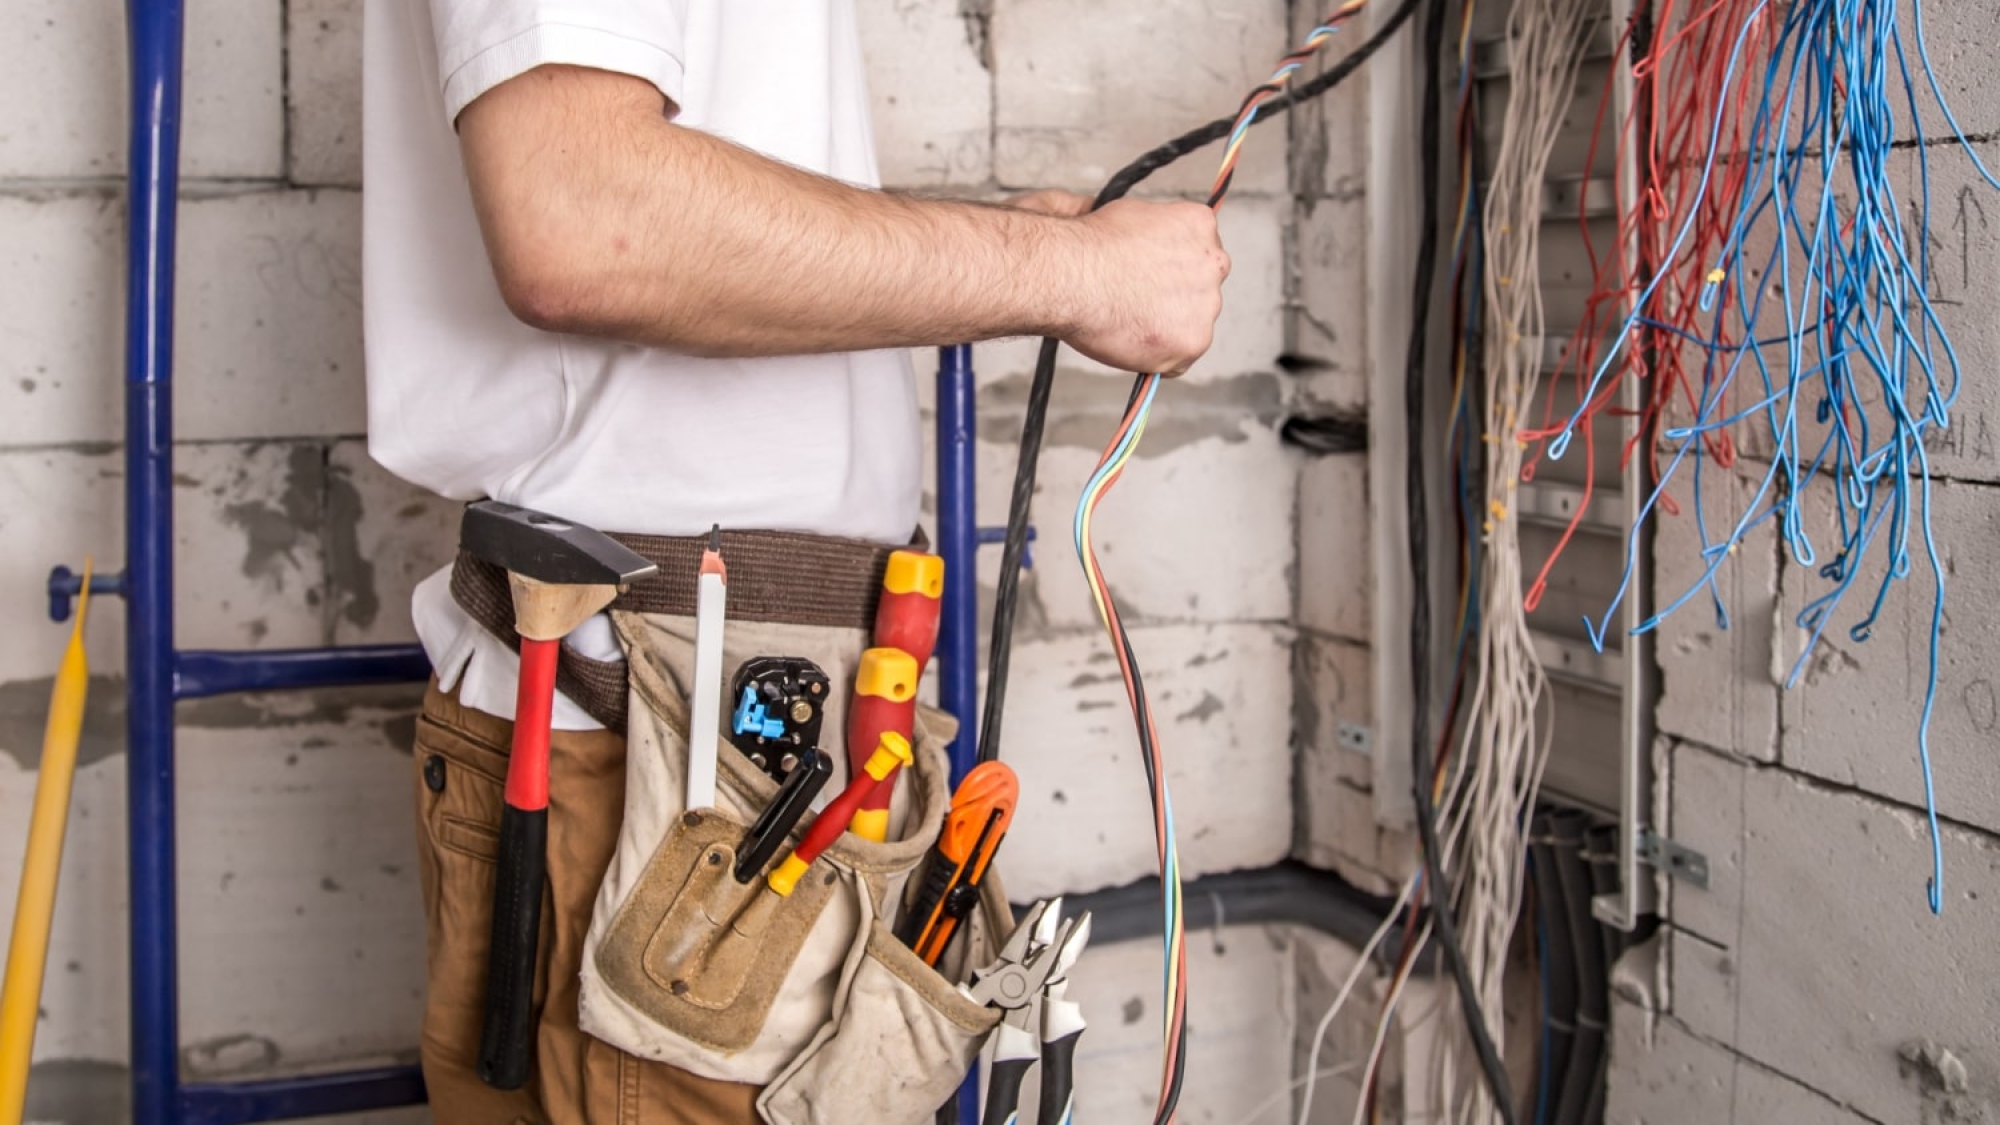 electrician-working-near-board-with-wires-installation-connection-electrics-min